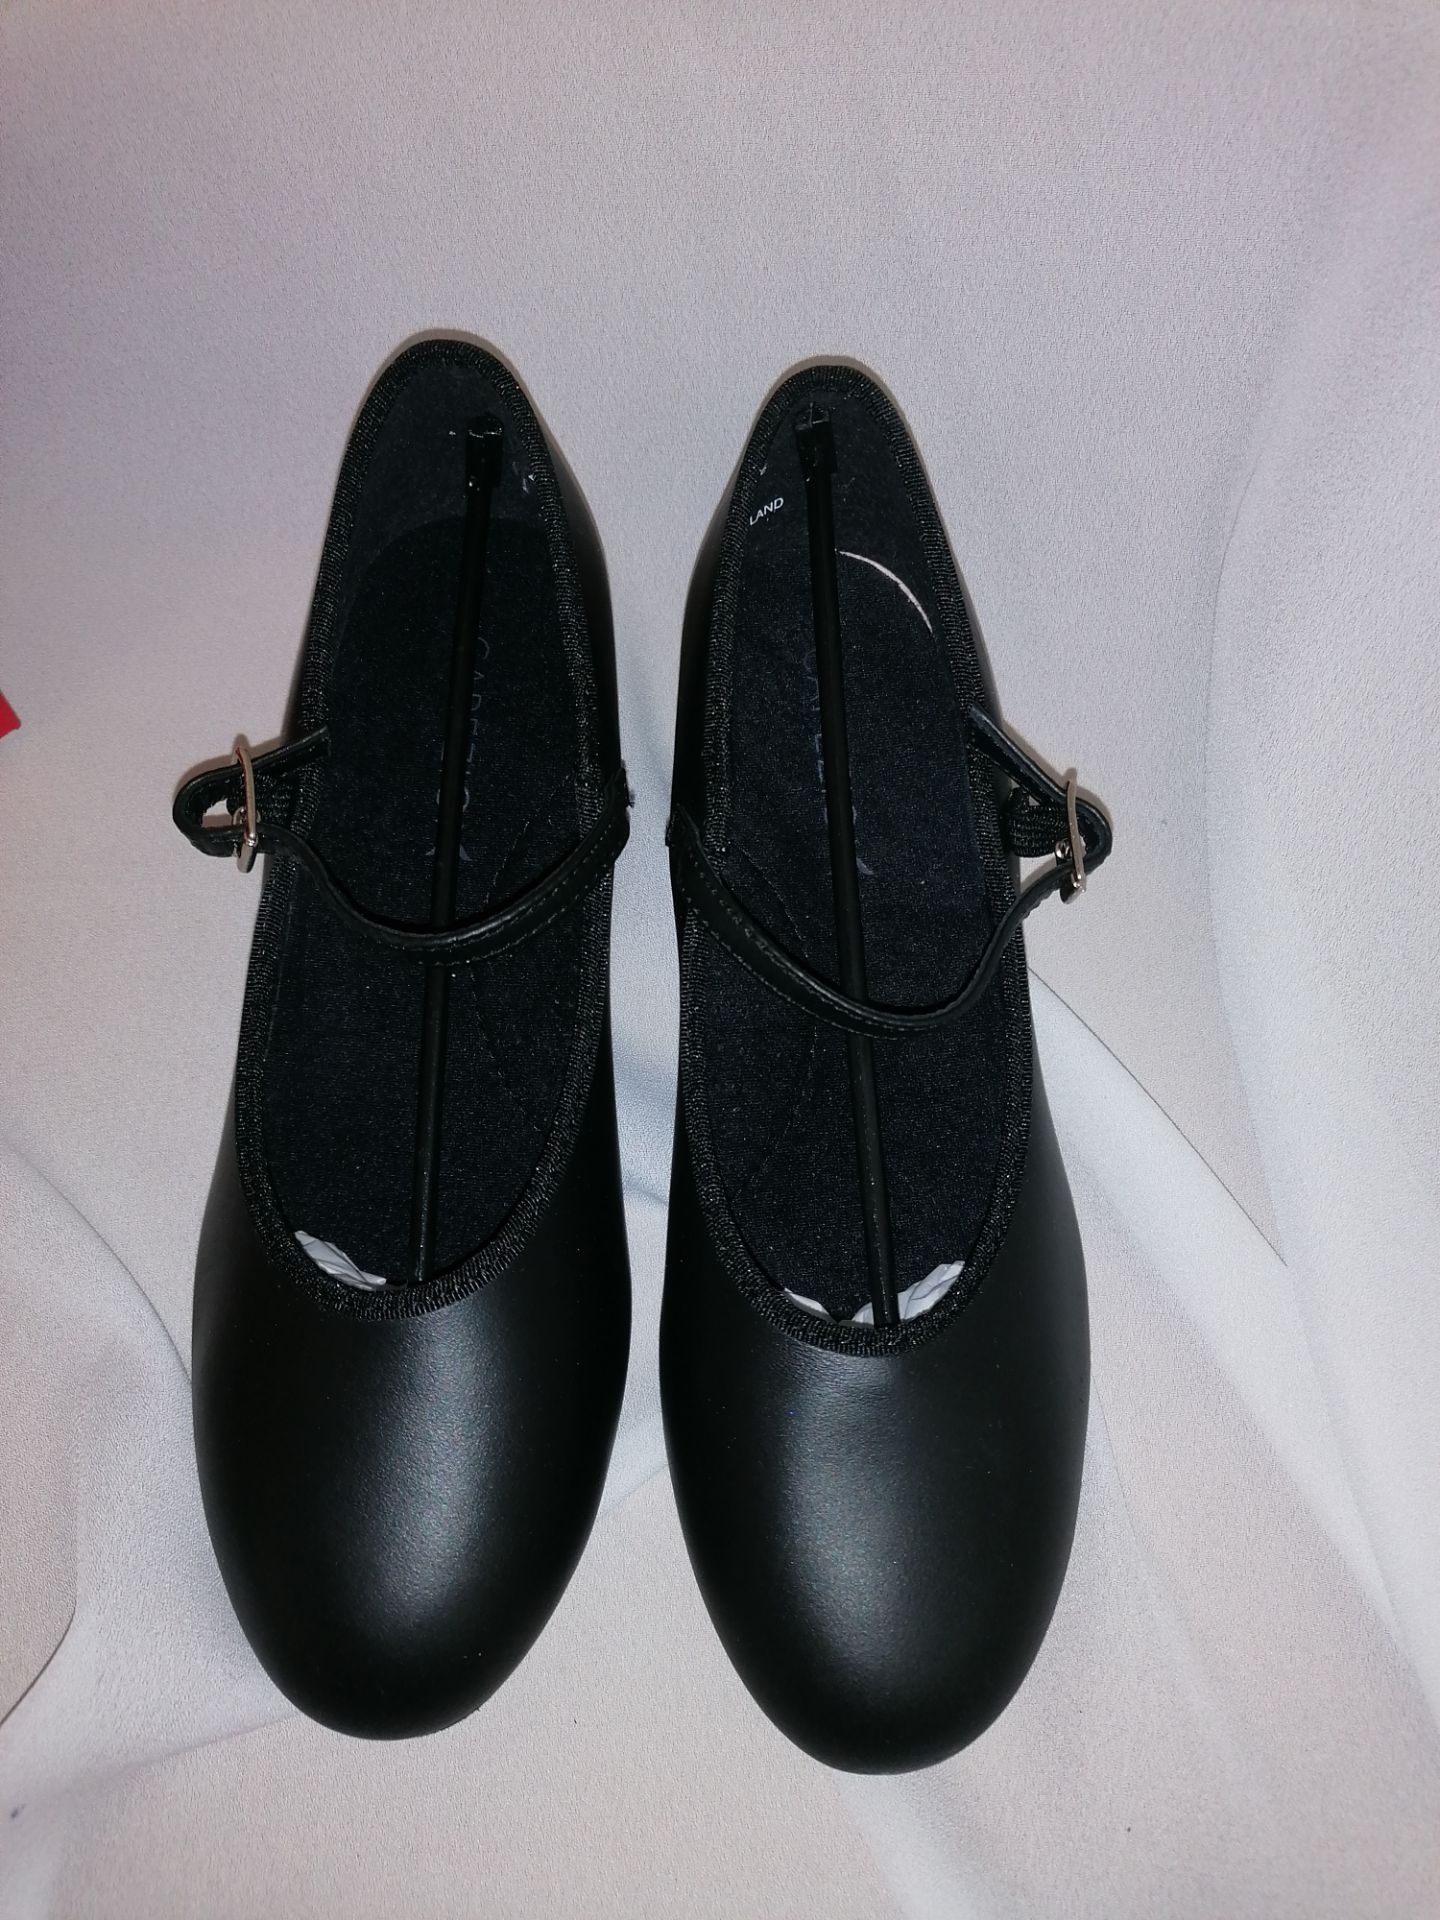 31 x Black character tap shoes model 451 aizes 6-10M - Image 6 of 6